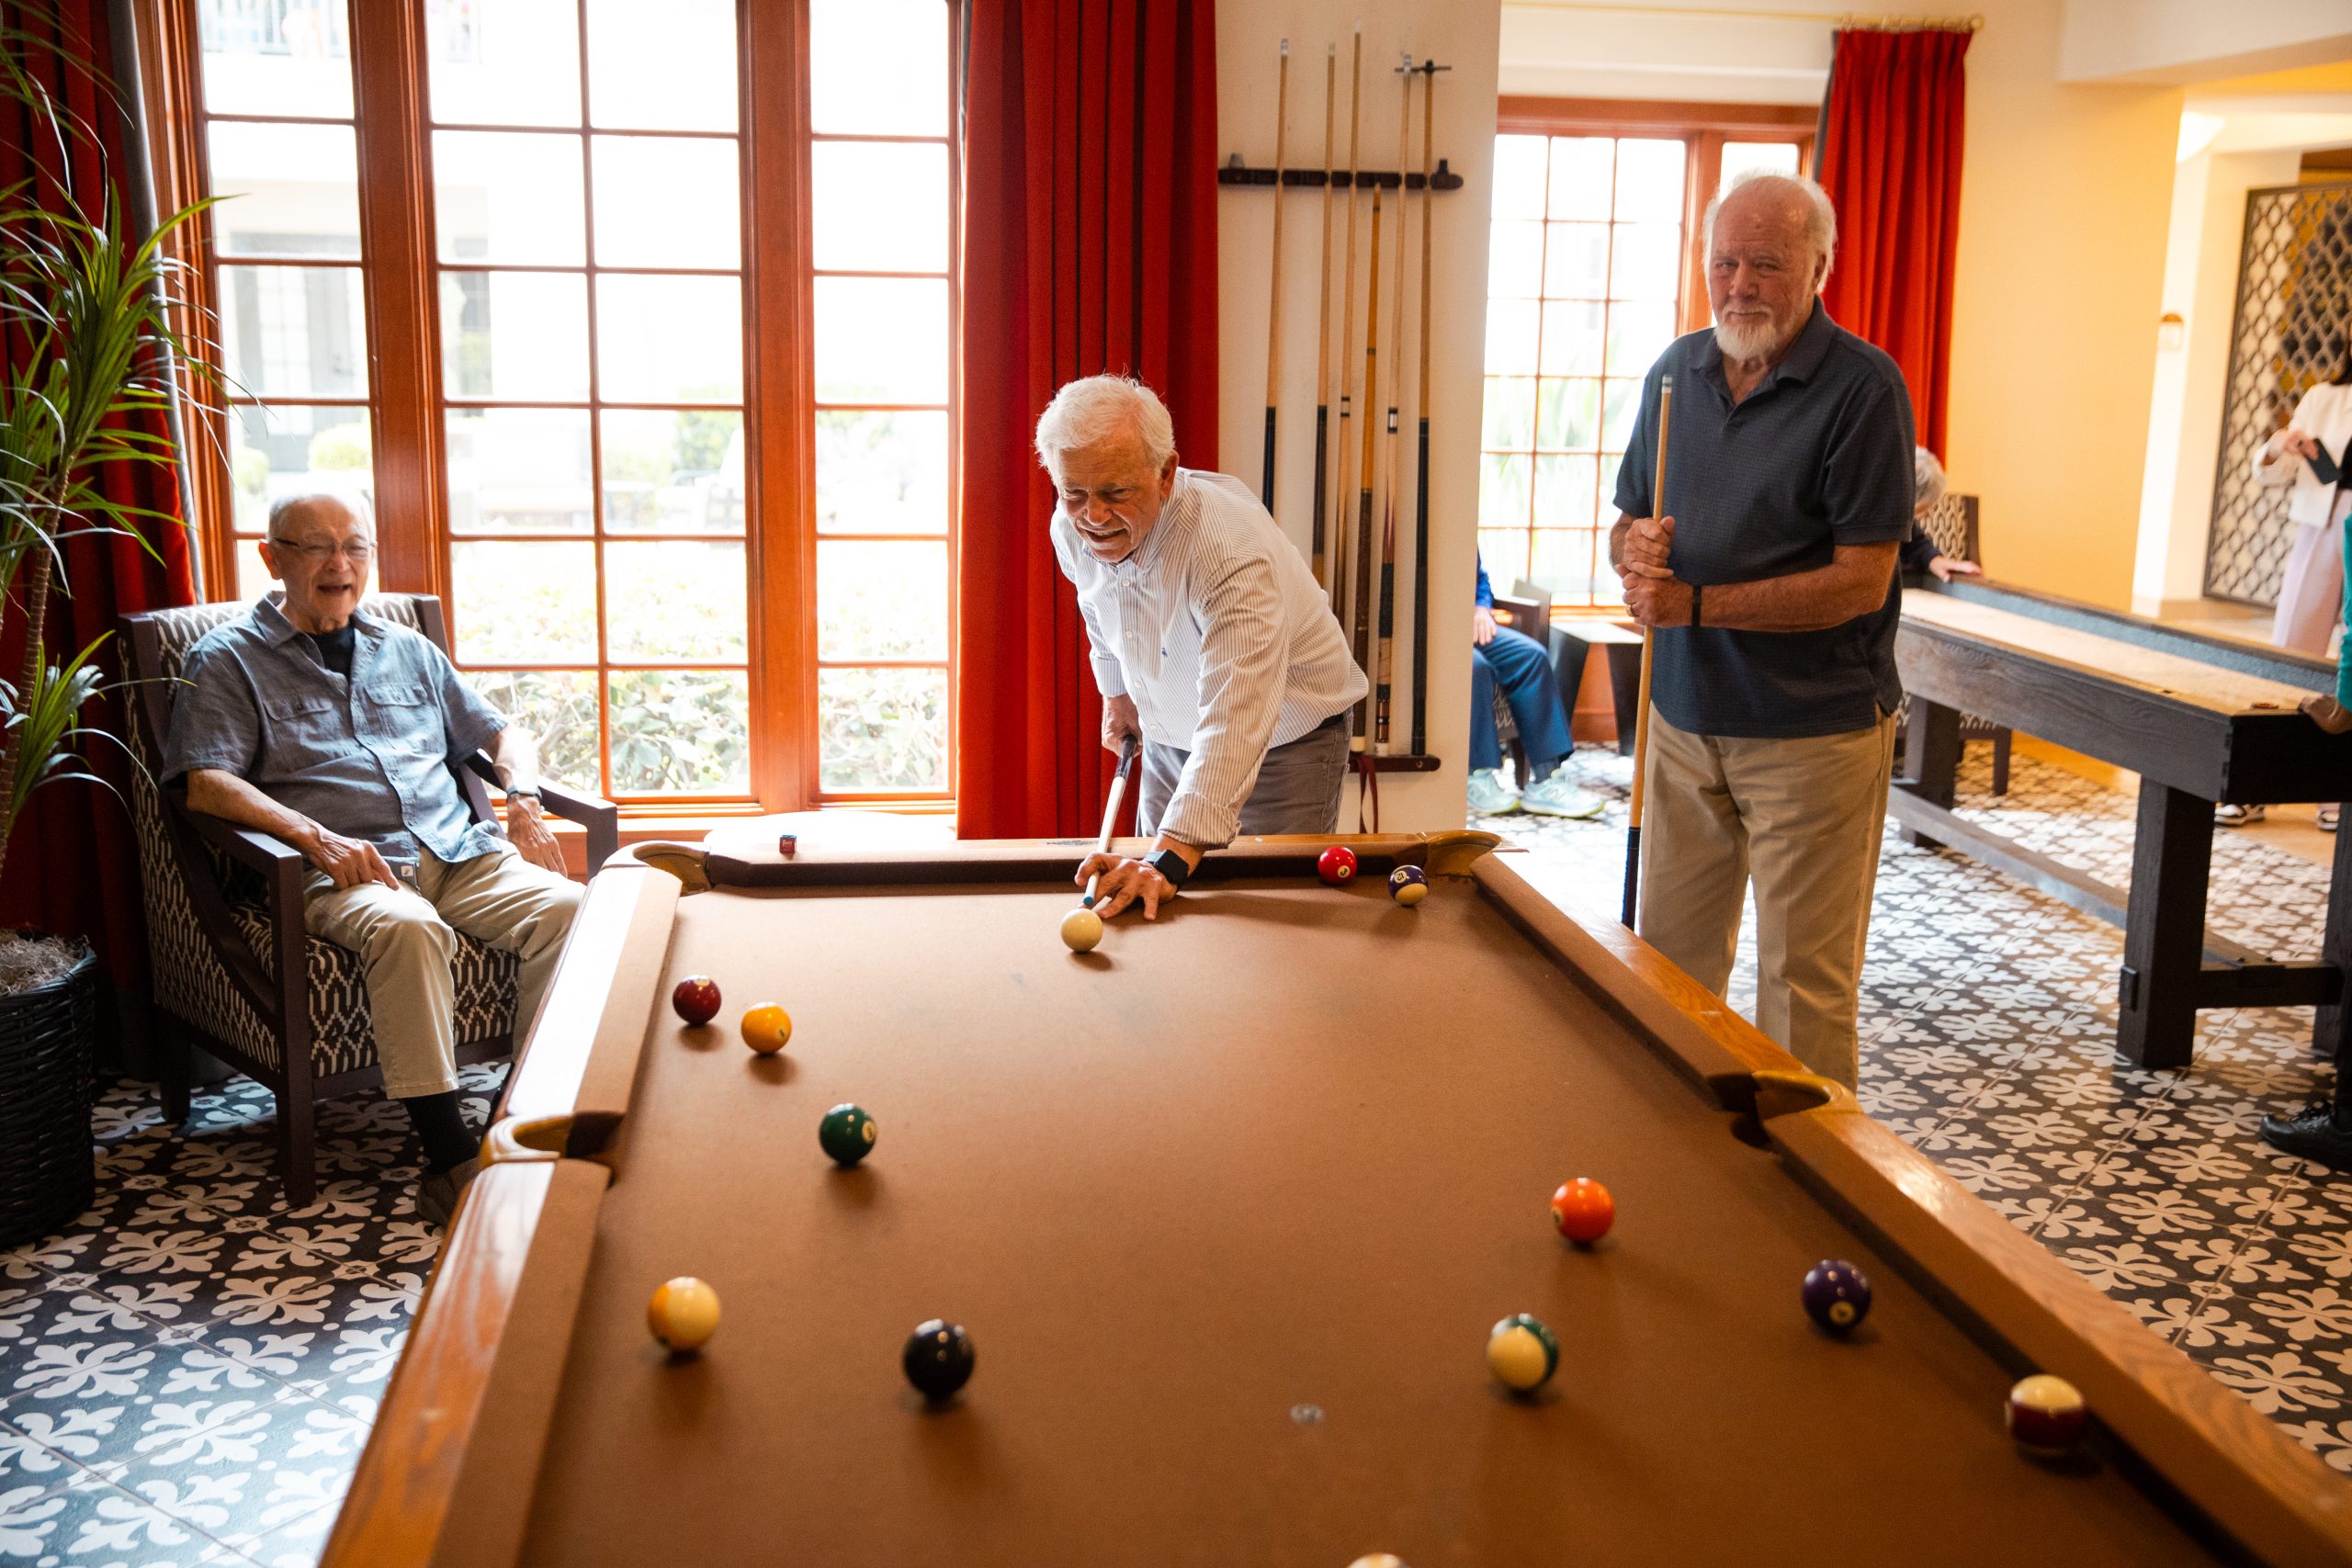 3 elderly men playing pool together in game room